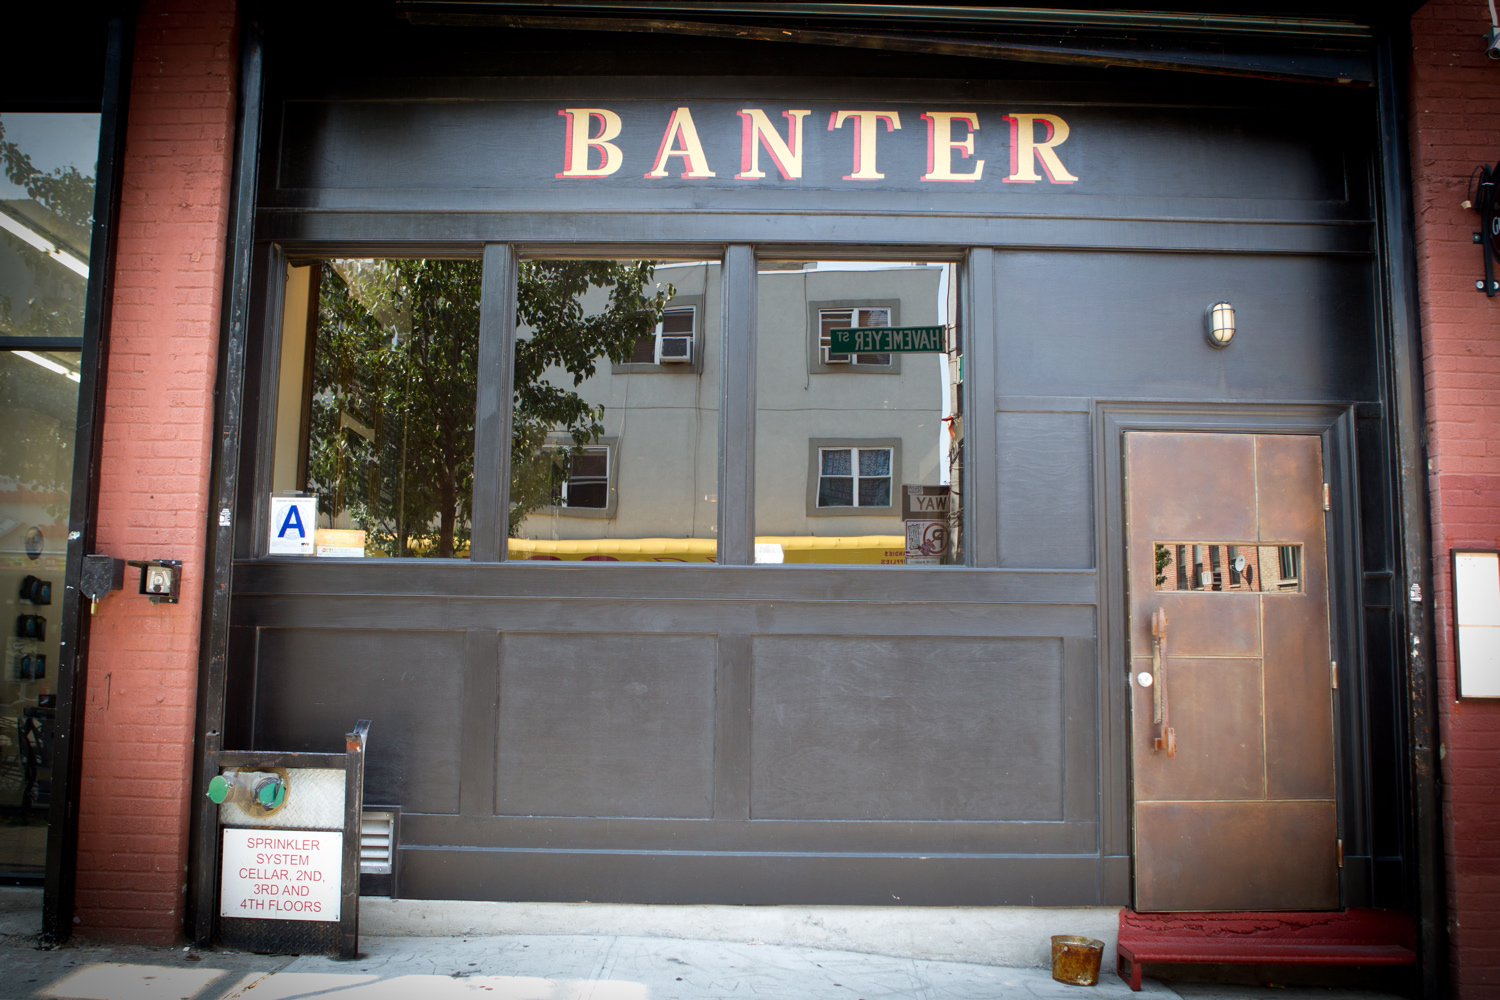 Banter TAG Heuer Women's World Cup Pub Guide